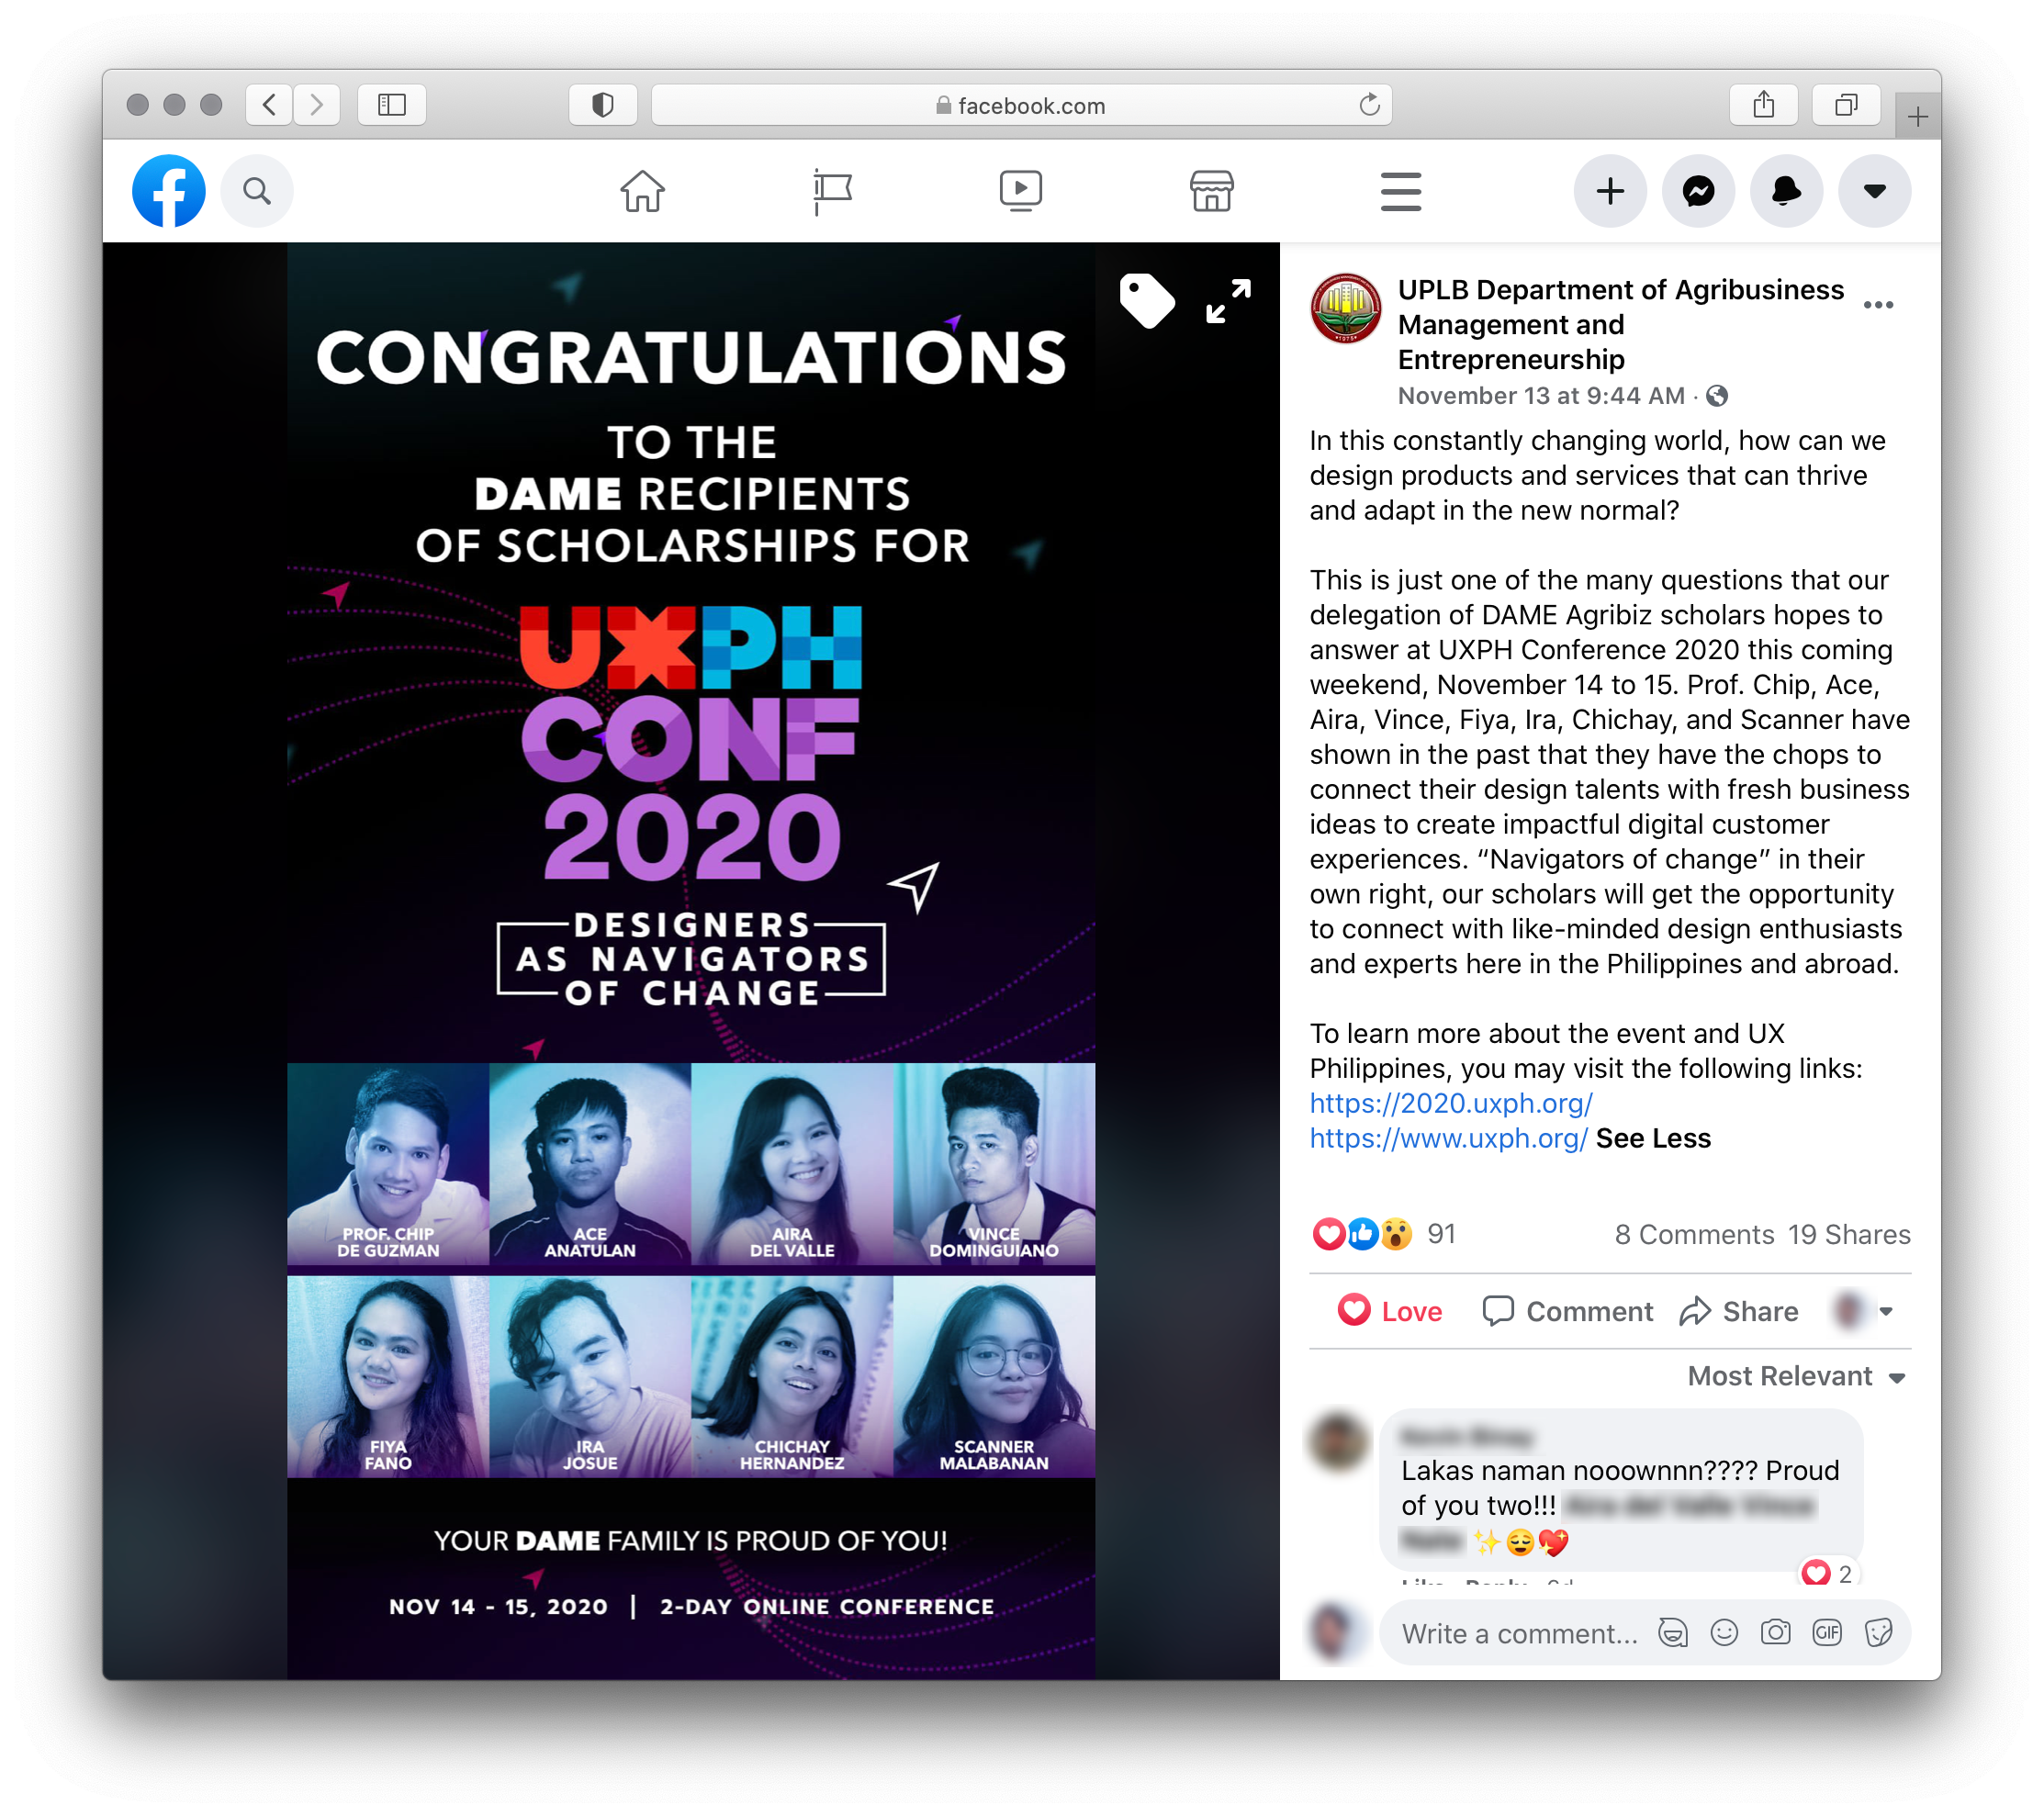 The announcement of DAME’s recipients of scholarships for UXPH Conference 2020.